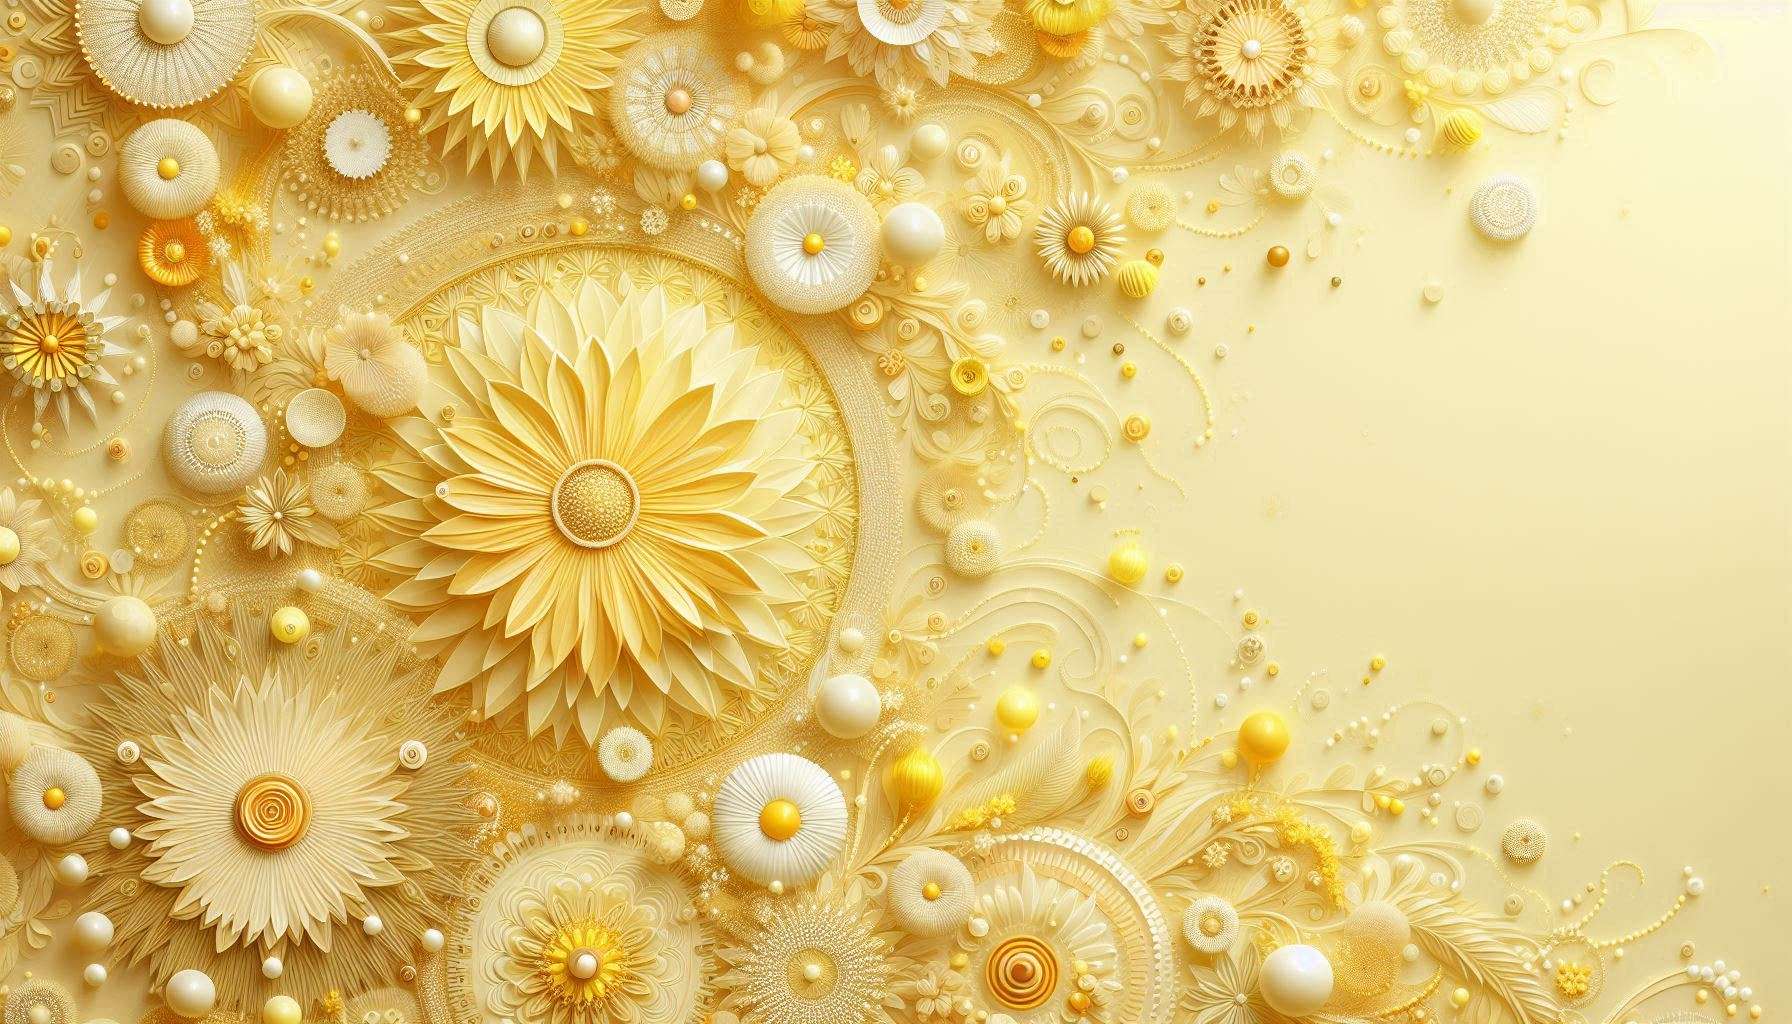 Download Free aesthetic light yellow background with flower for websites, slideshows, and designs | royalty-free and unlimited use.